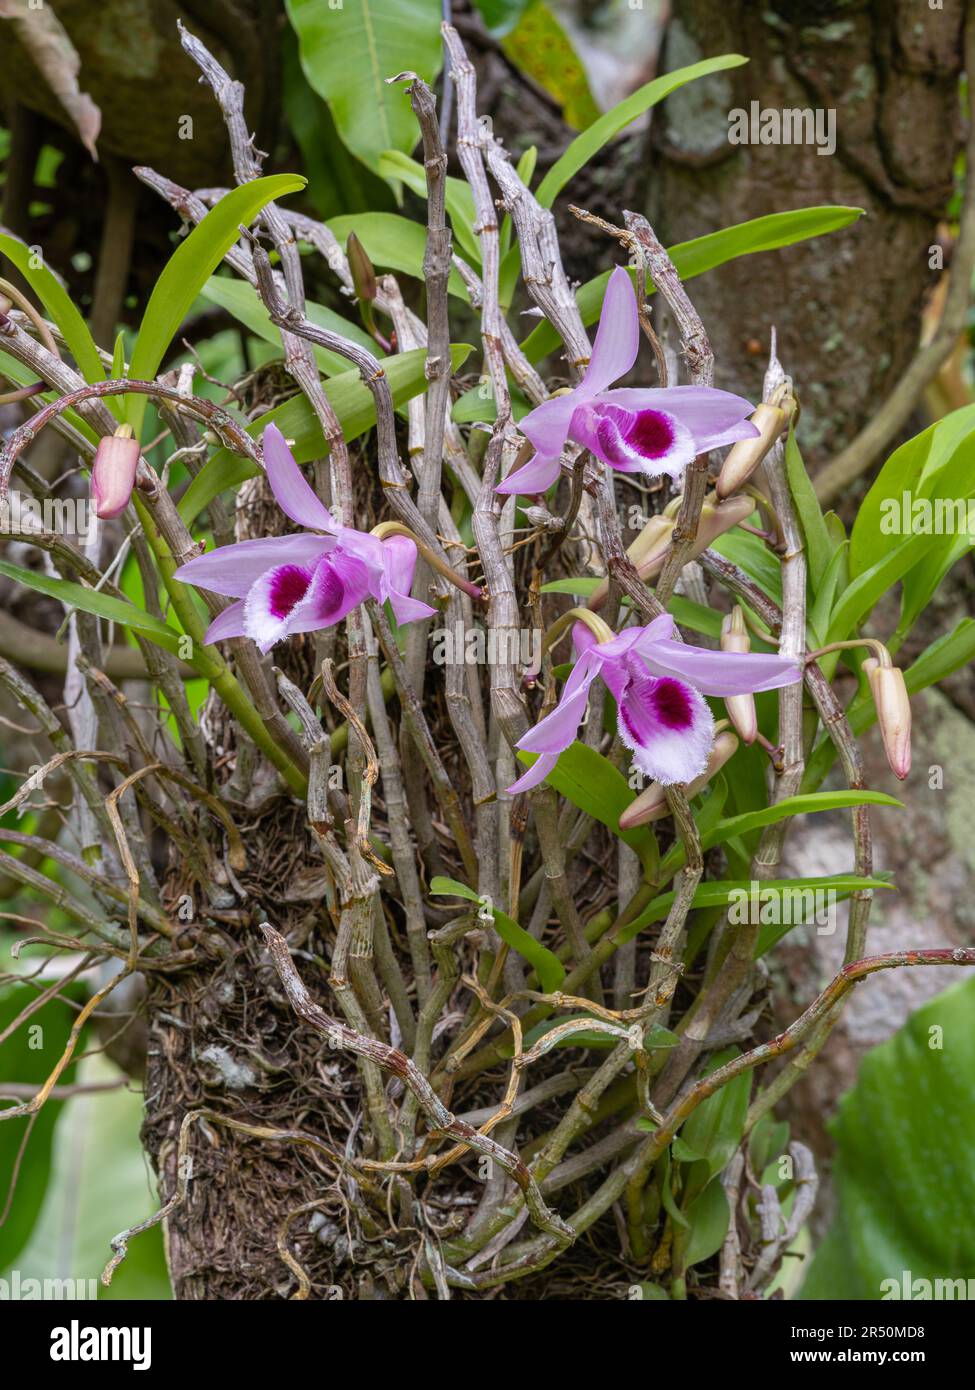 Closeup view of pink and purple flowers of dendrobium anosmum epiphytic orchid species blooming outdoors in tropical garden Stock Photo